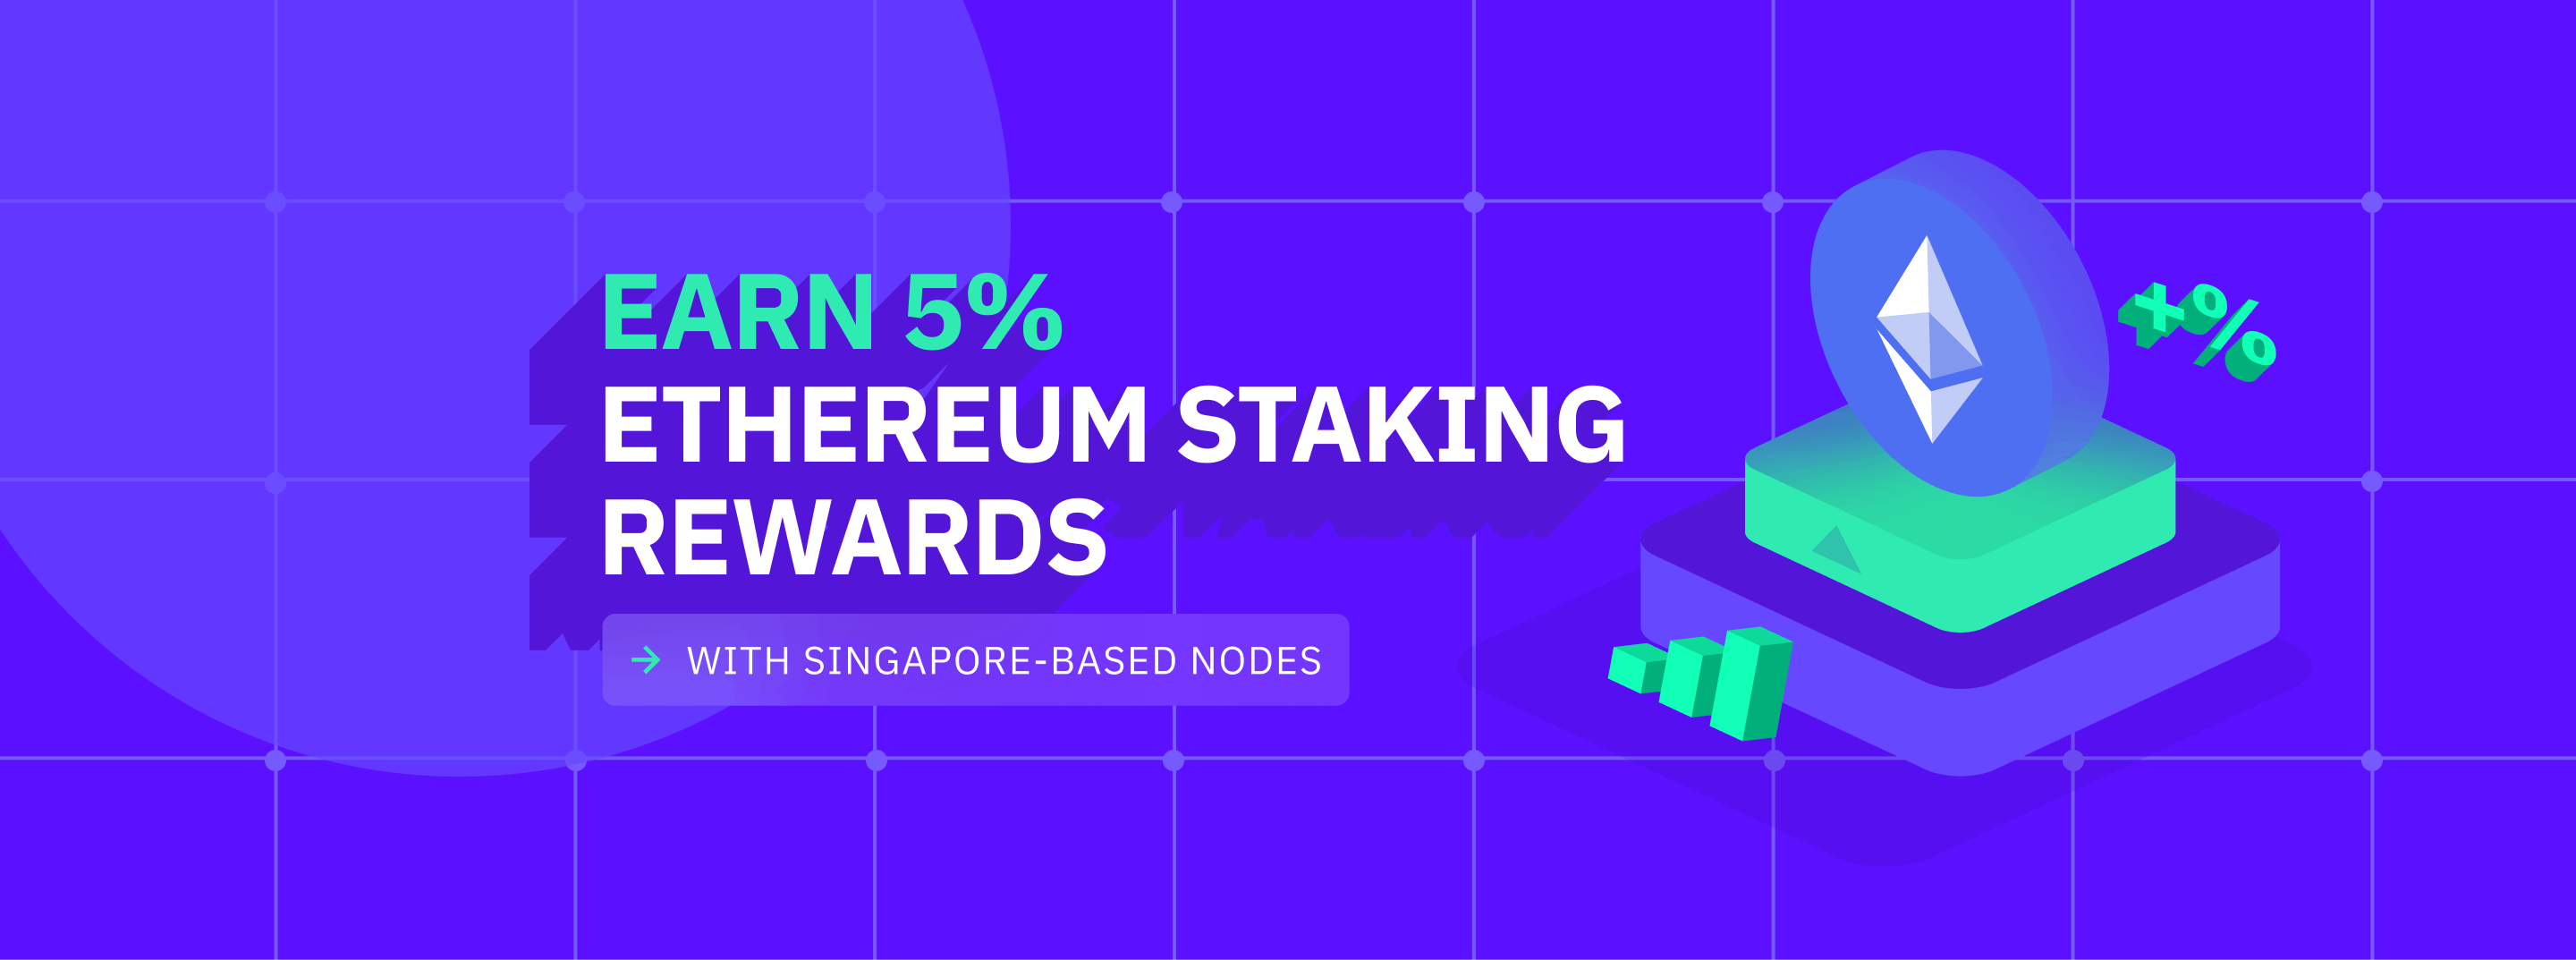 Cake DeFi adds Ethereum Staking service with 5% returns via Singapore-based nodes that allows unstaking anytime